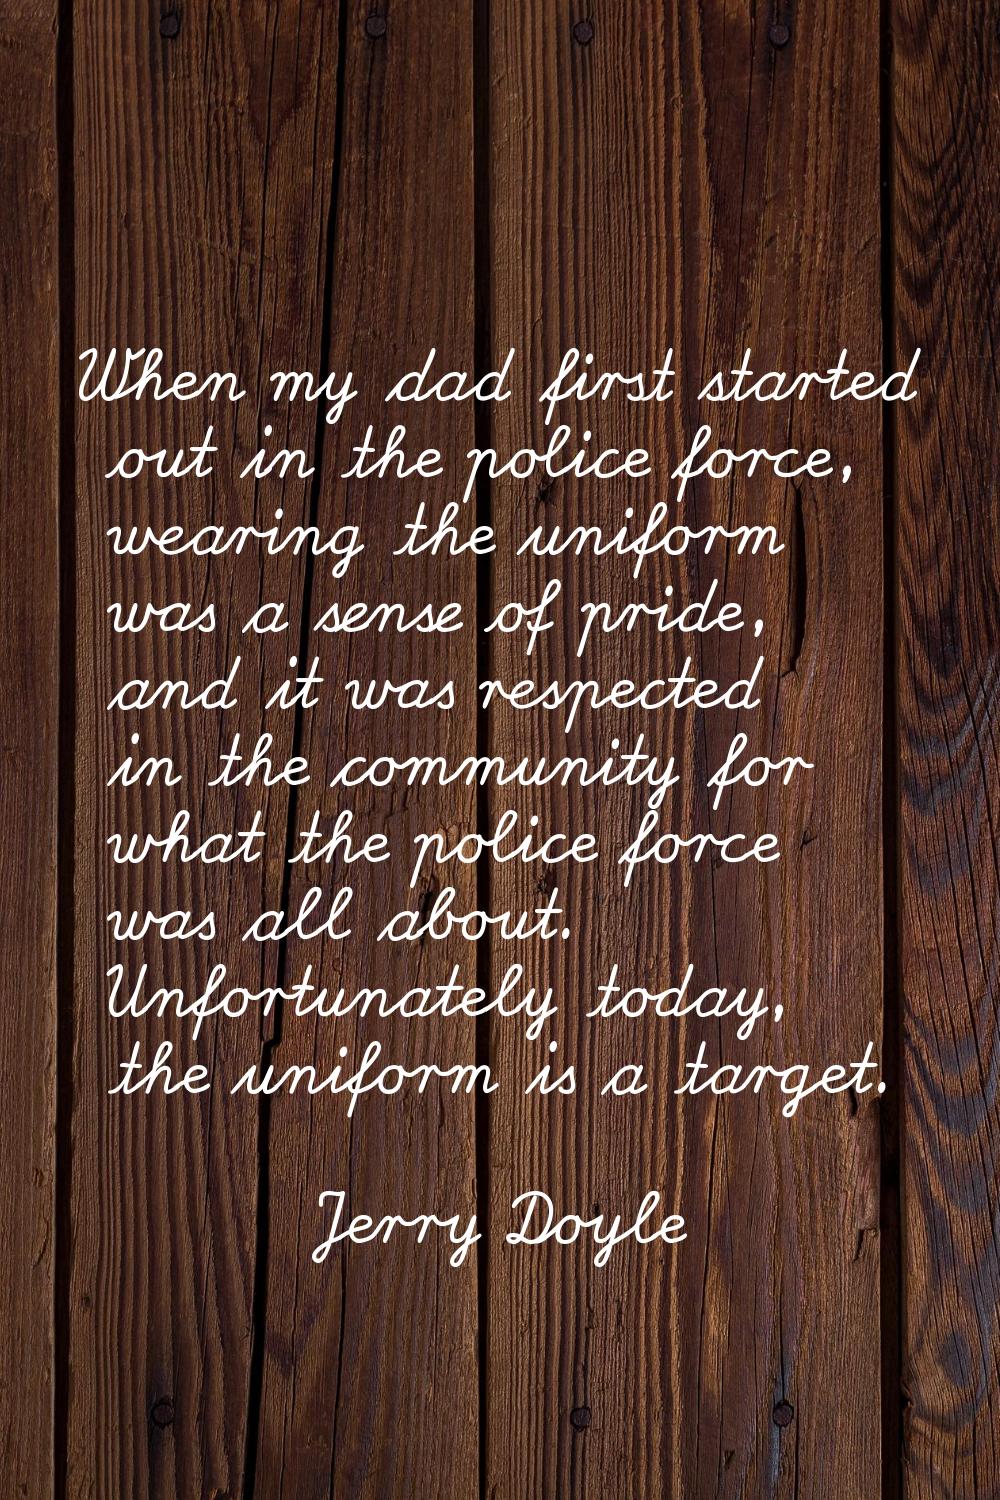 When my dad first started out in the police force, wearing the uniform was a sense of pride, and it